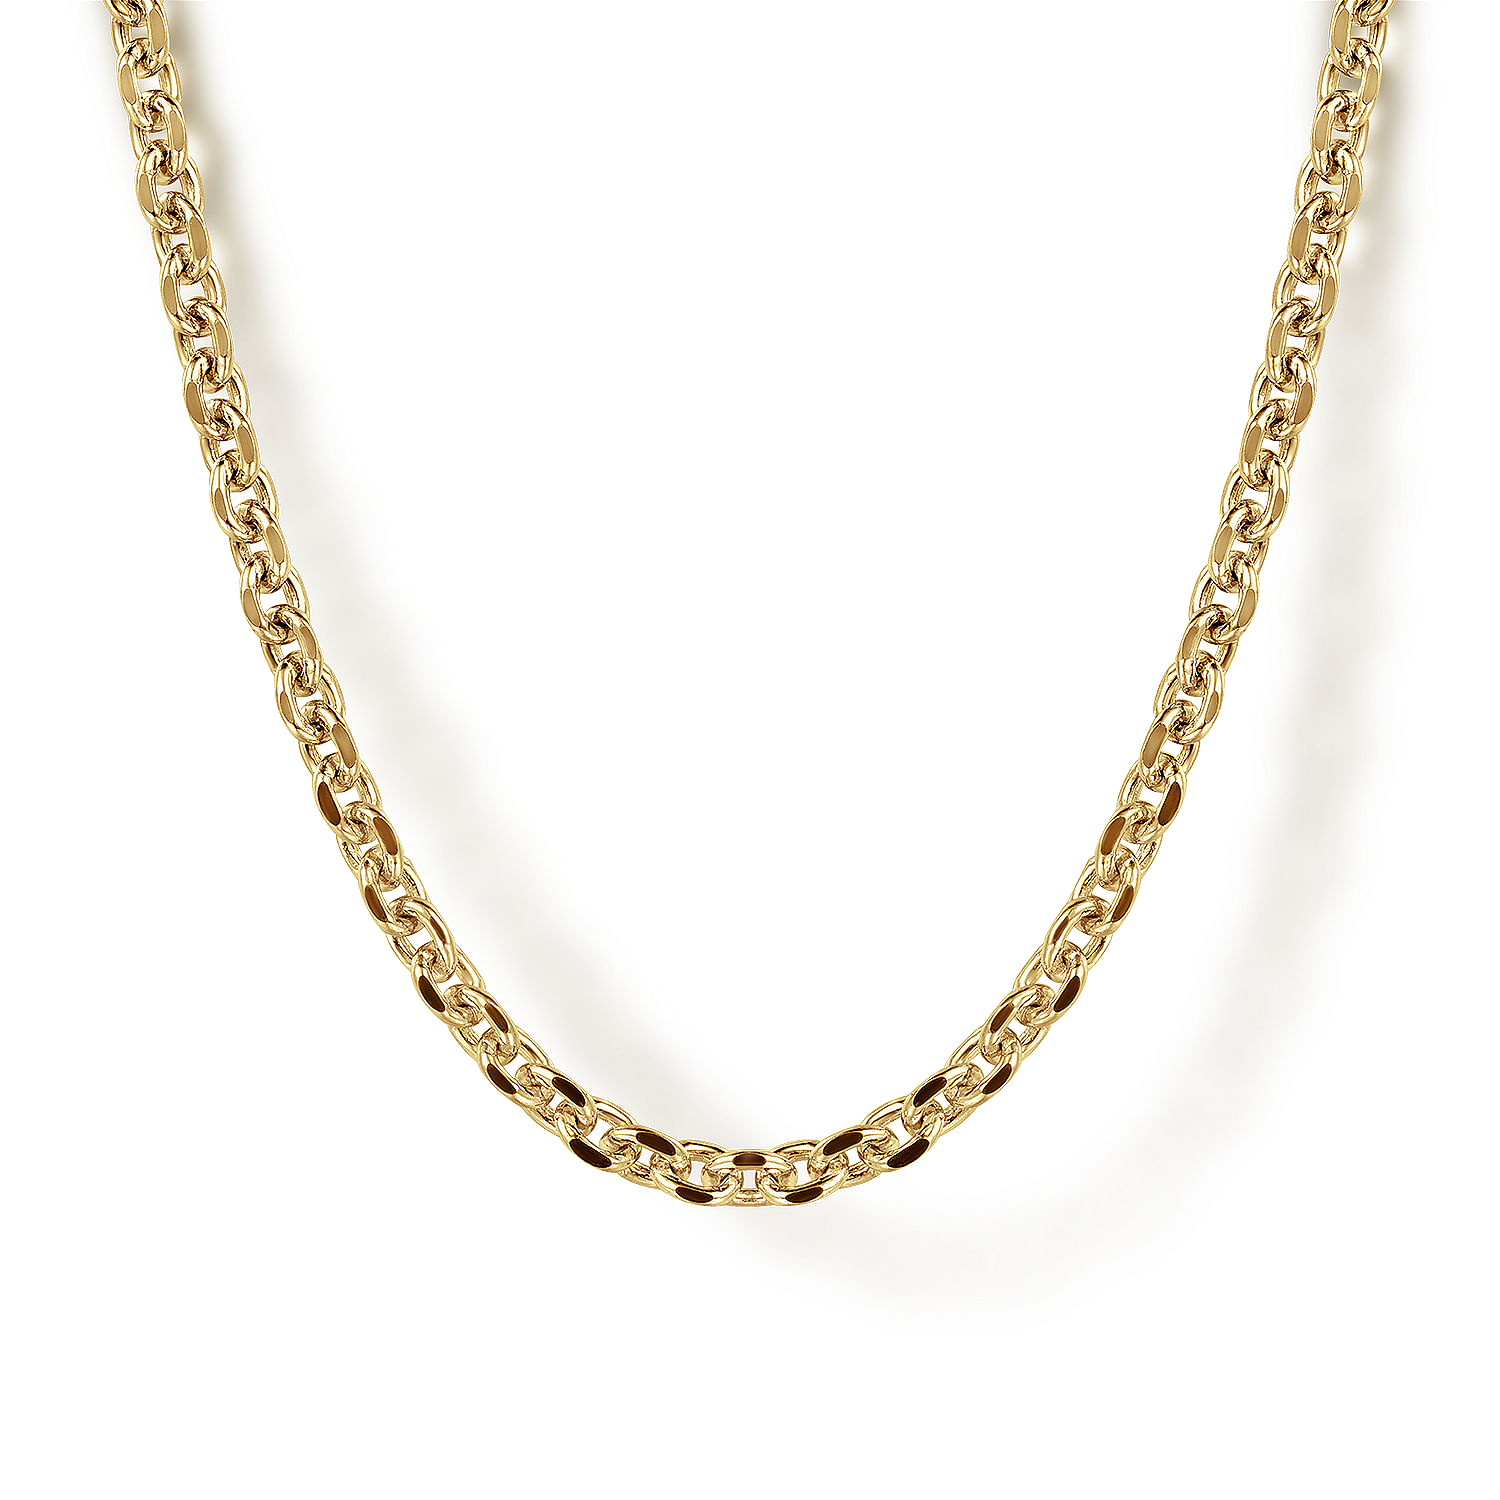 22 Inch 14K Yellow Gold Hollow Men's Link Chain Necklace